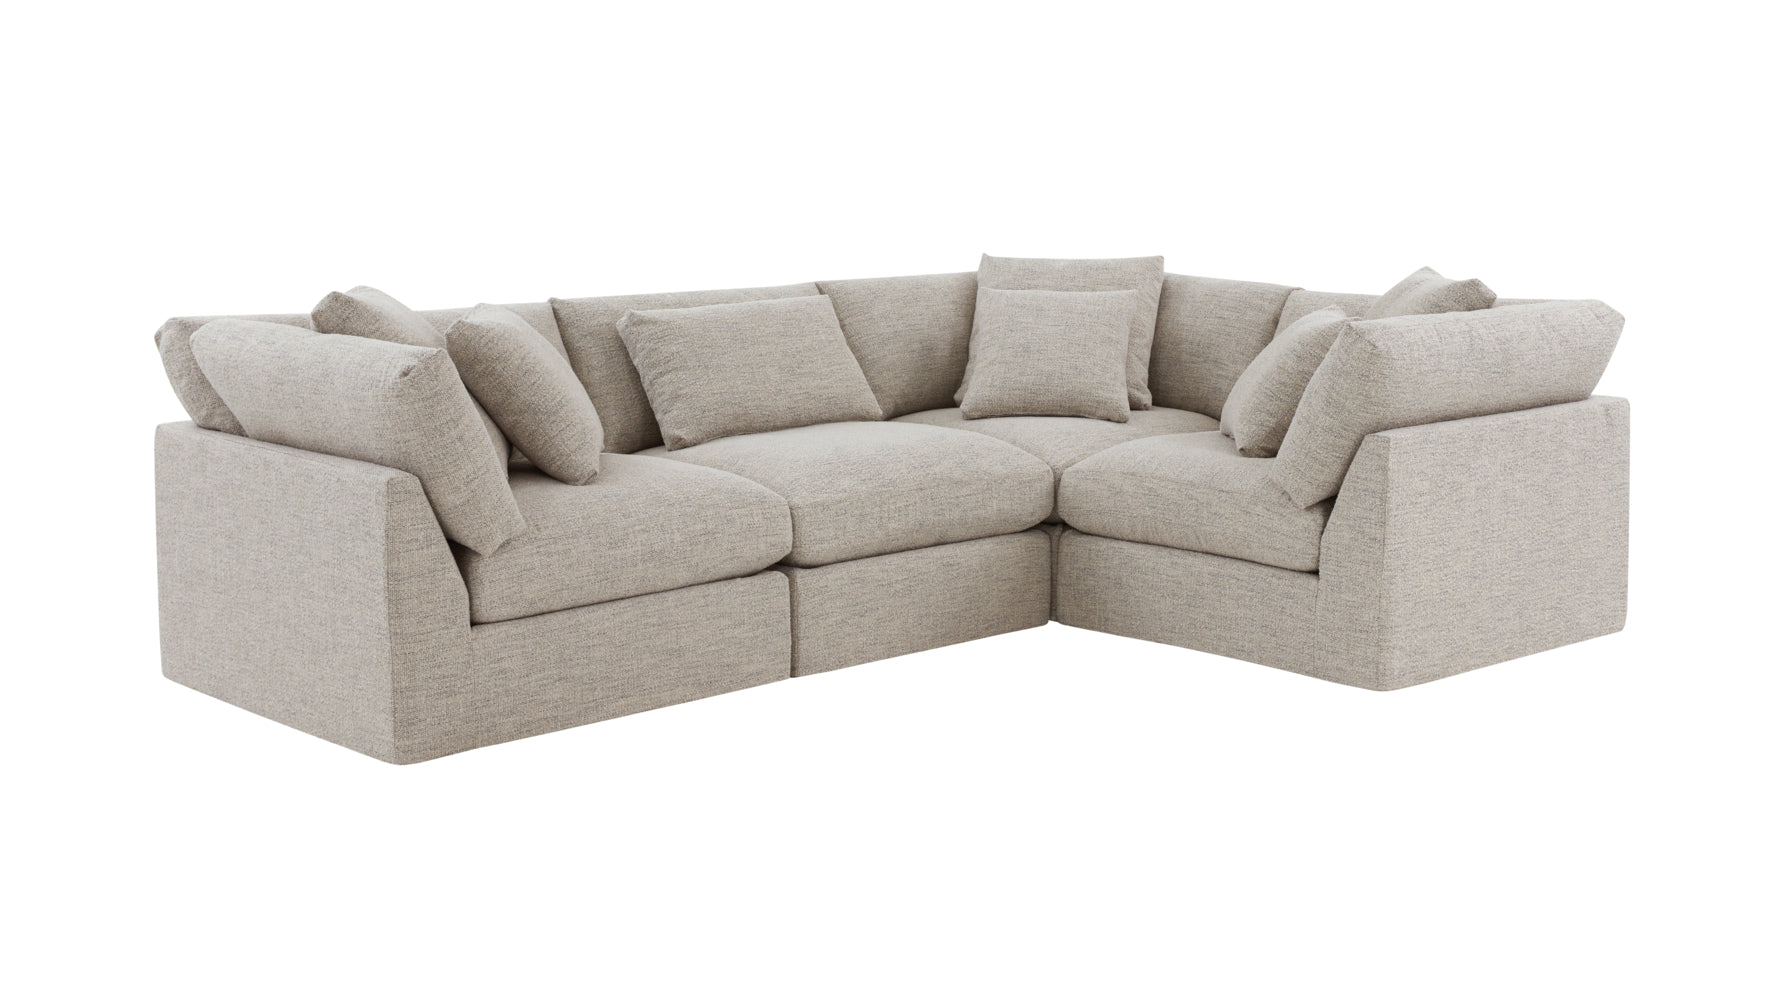 Get Together™ 4-Piece Modular Sectional Closed, Standard, Oatmeal - Image 2